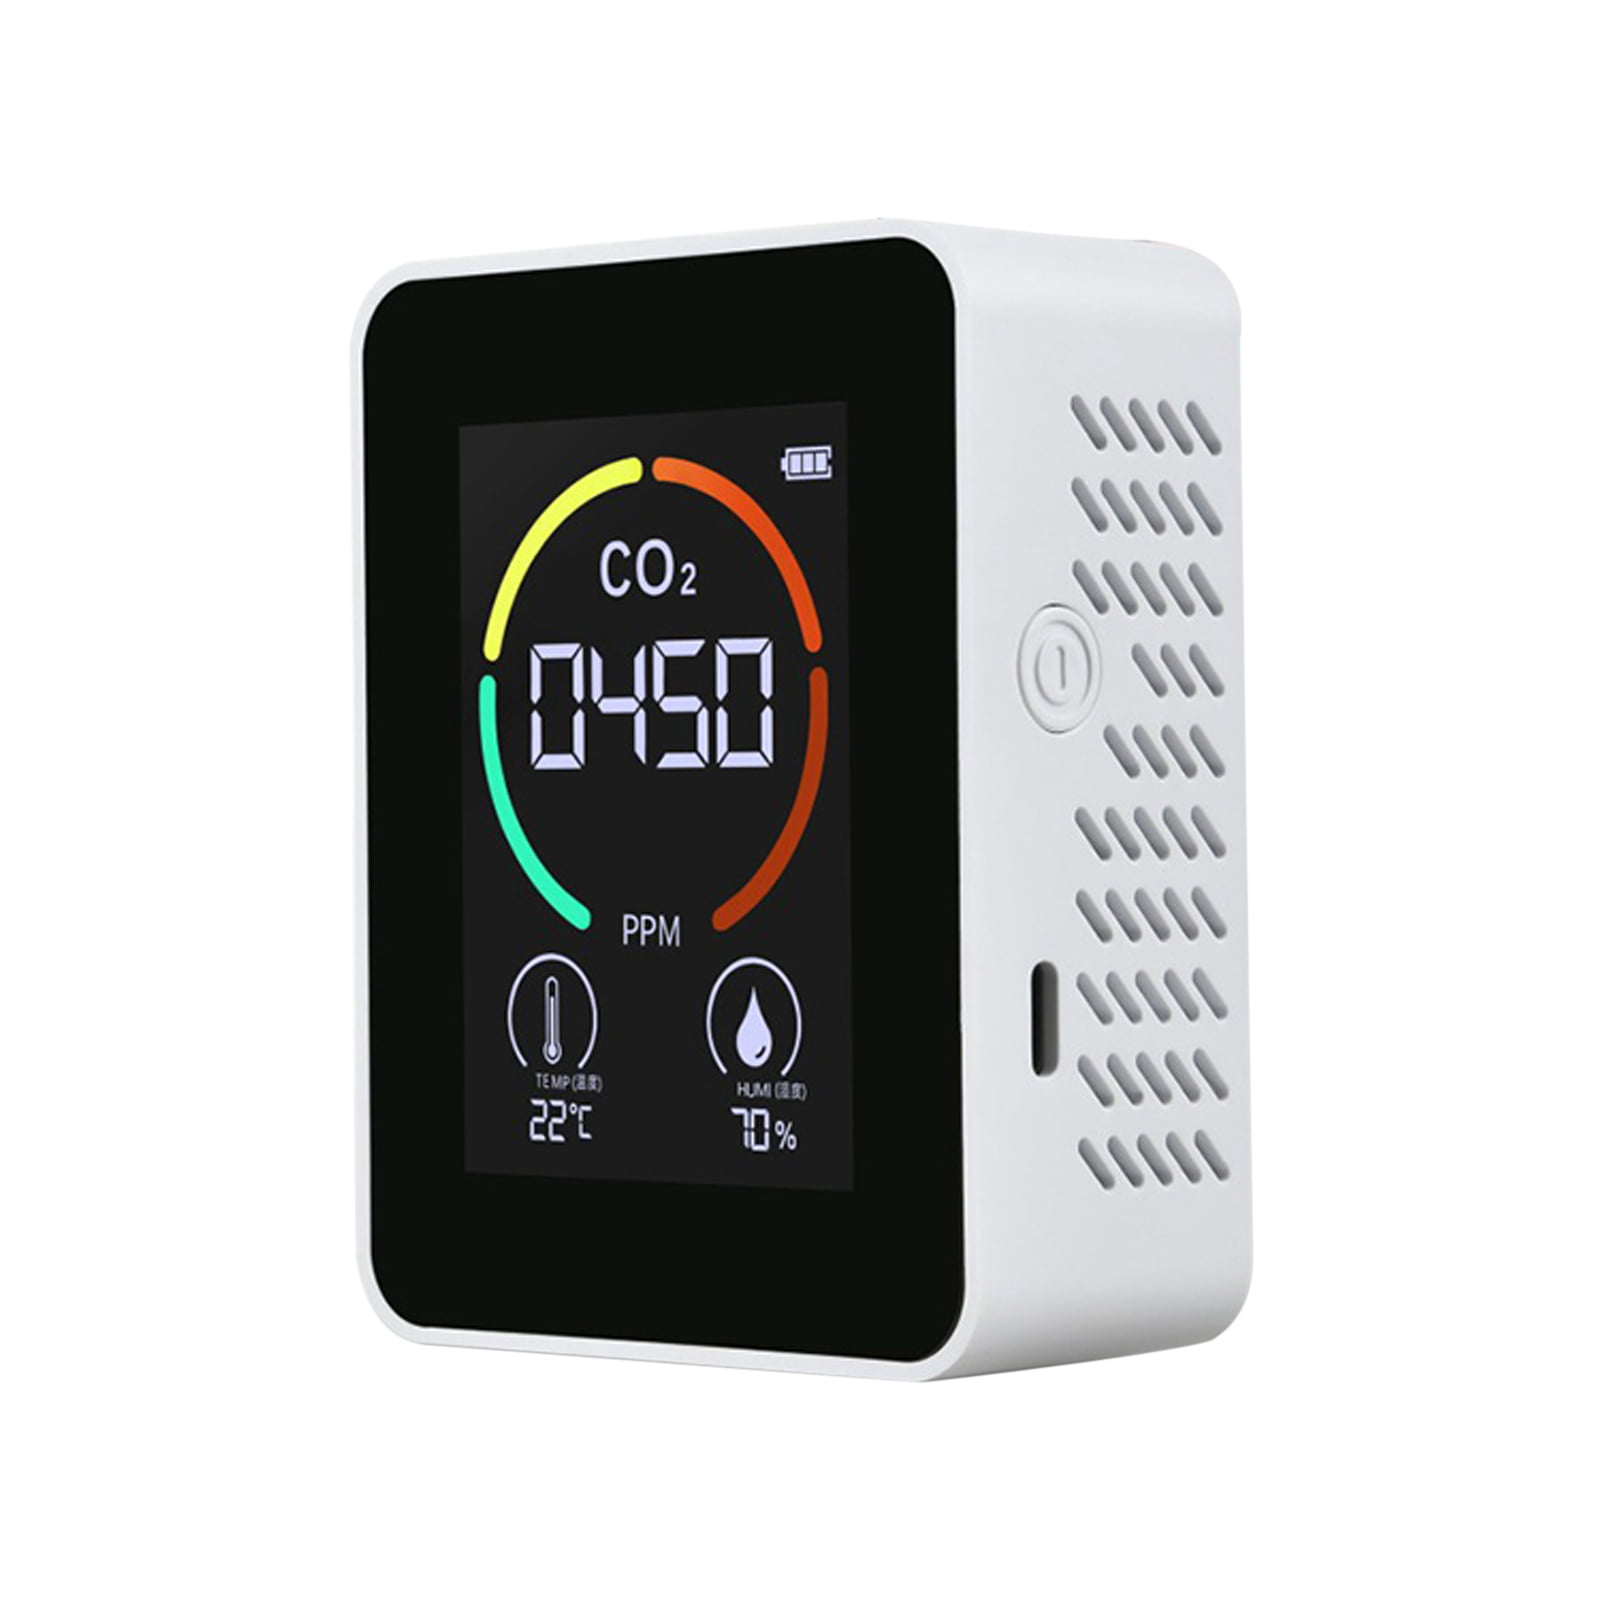 Details about   Smart CO2 Carbon Dioxide Monitor Temperature Humidity Air Quality Detector S7J4 